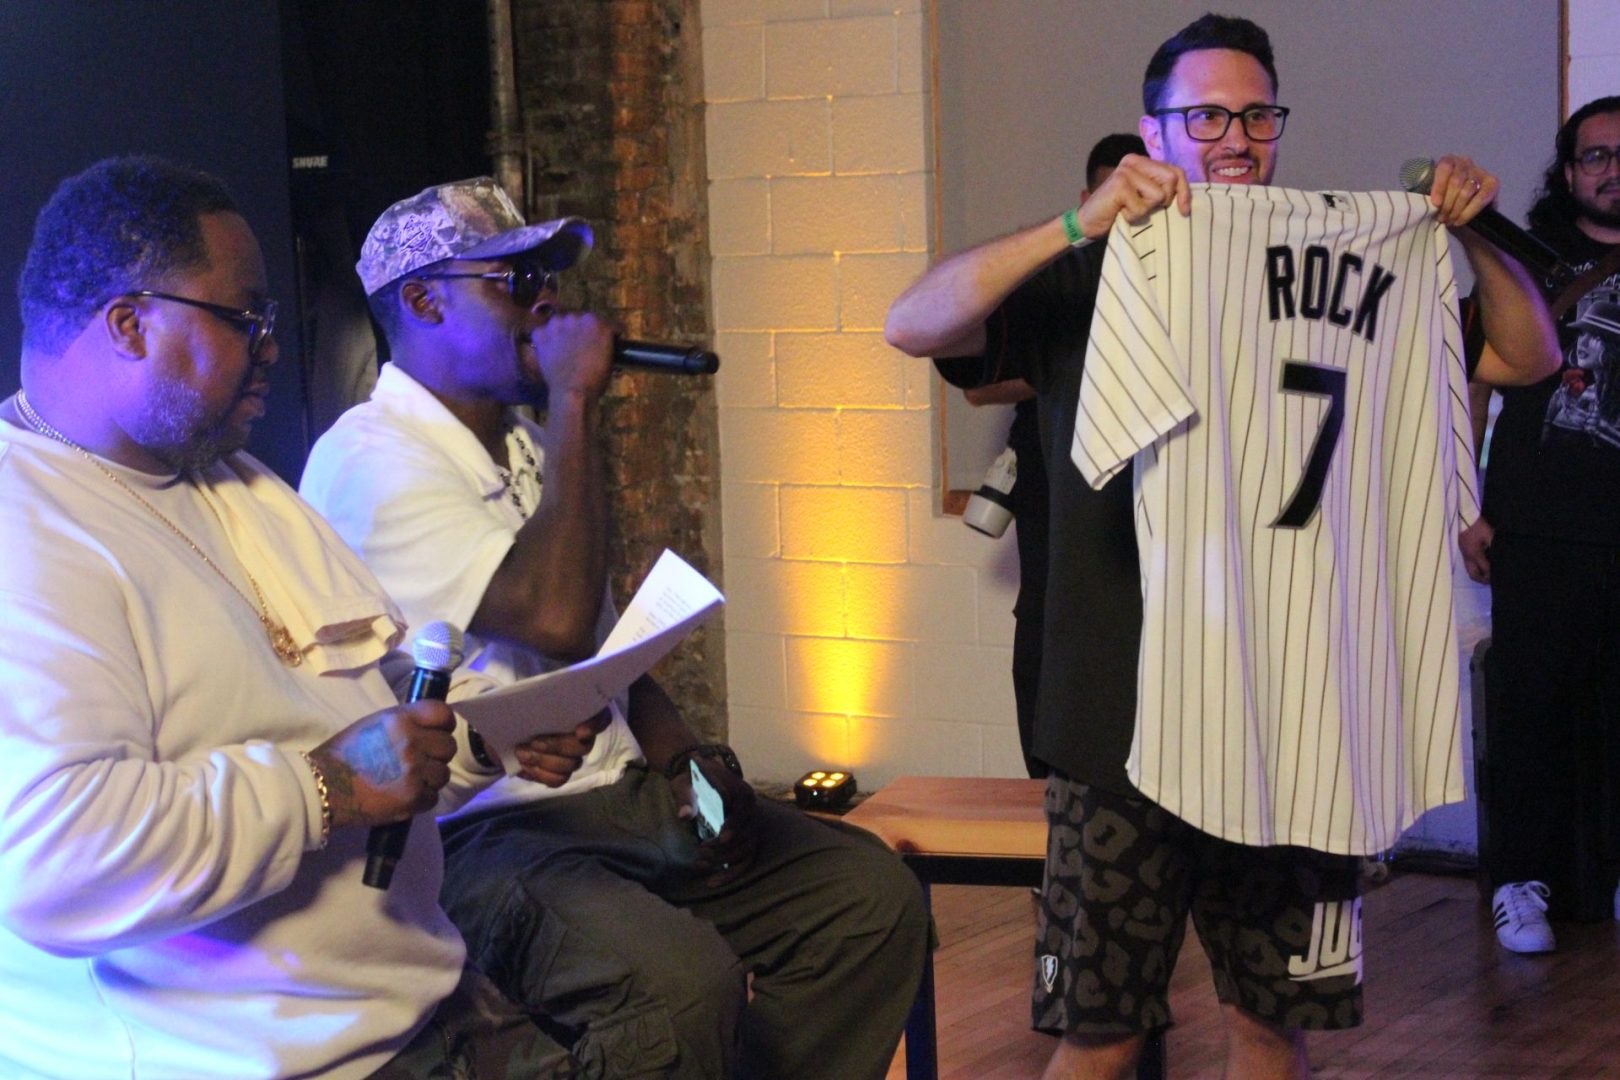 Chicago welcomes Pete Rock for an unforgettable conversation